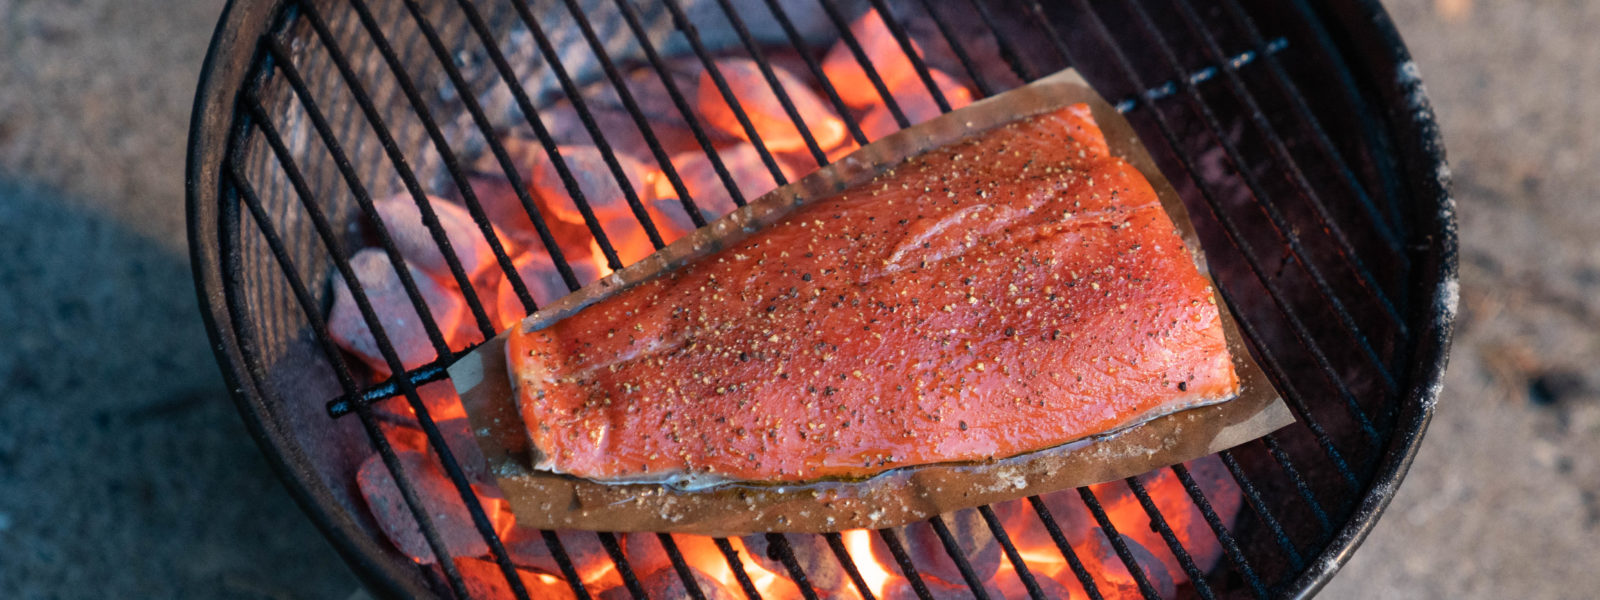 A piece of salmon cooking on a grill